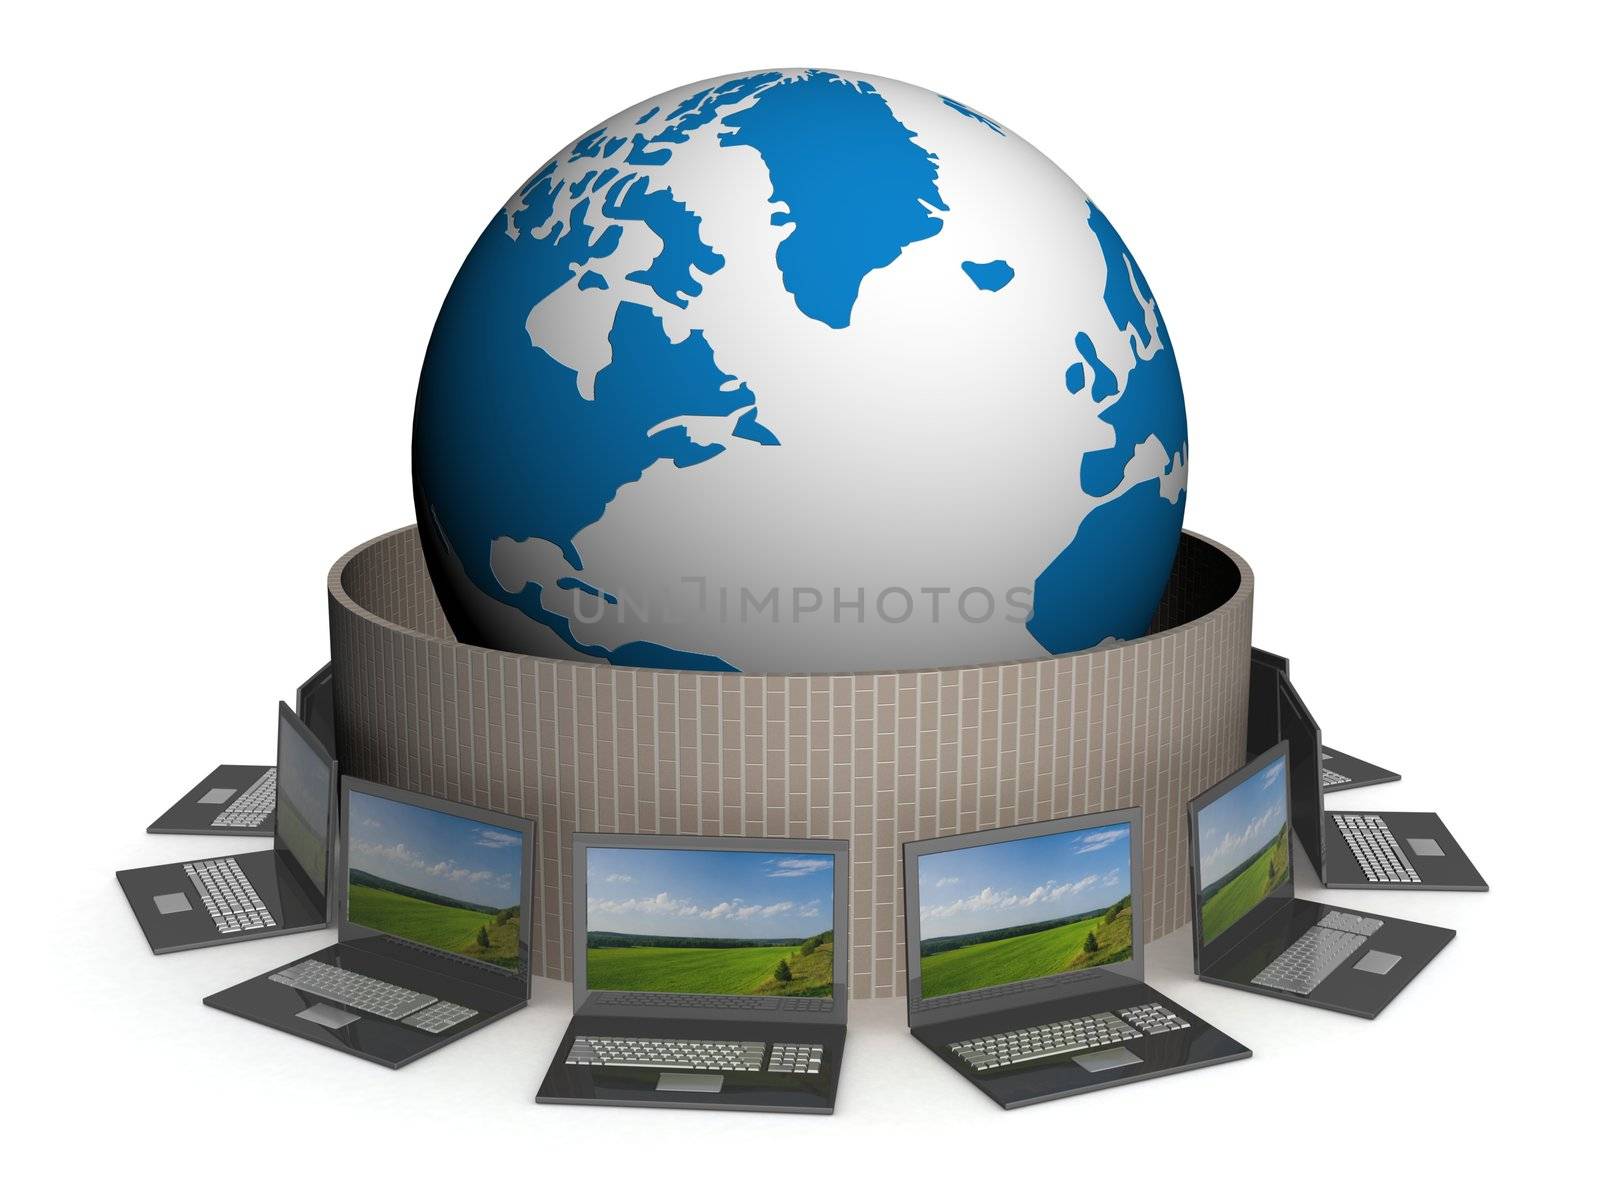 Protected global network the Internet. 3D image.